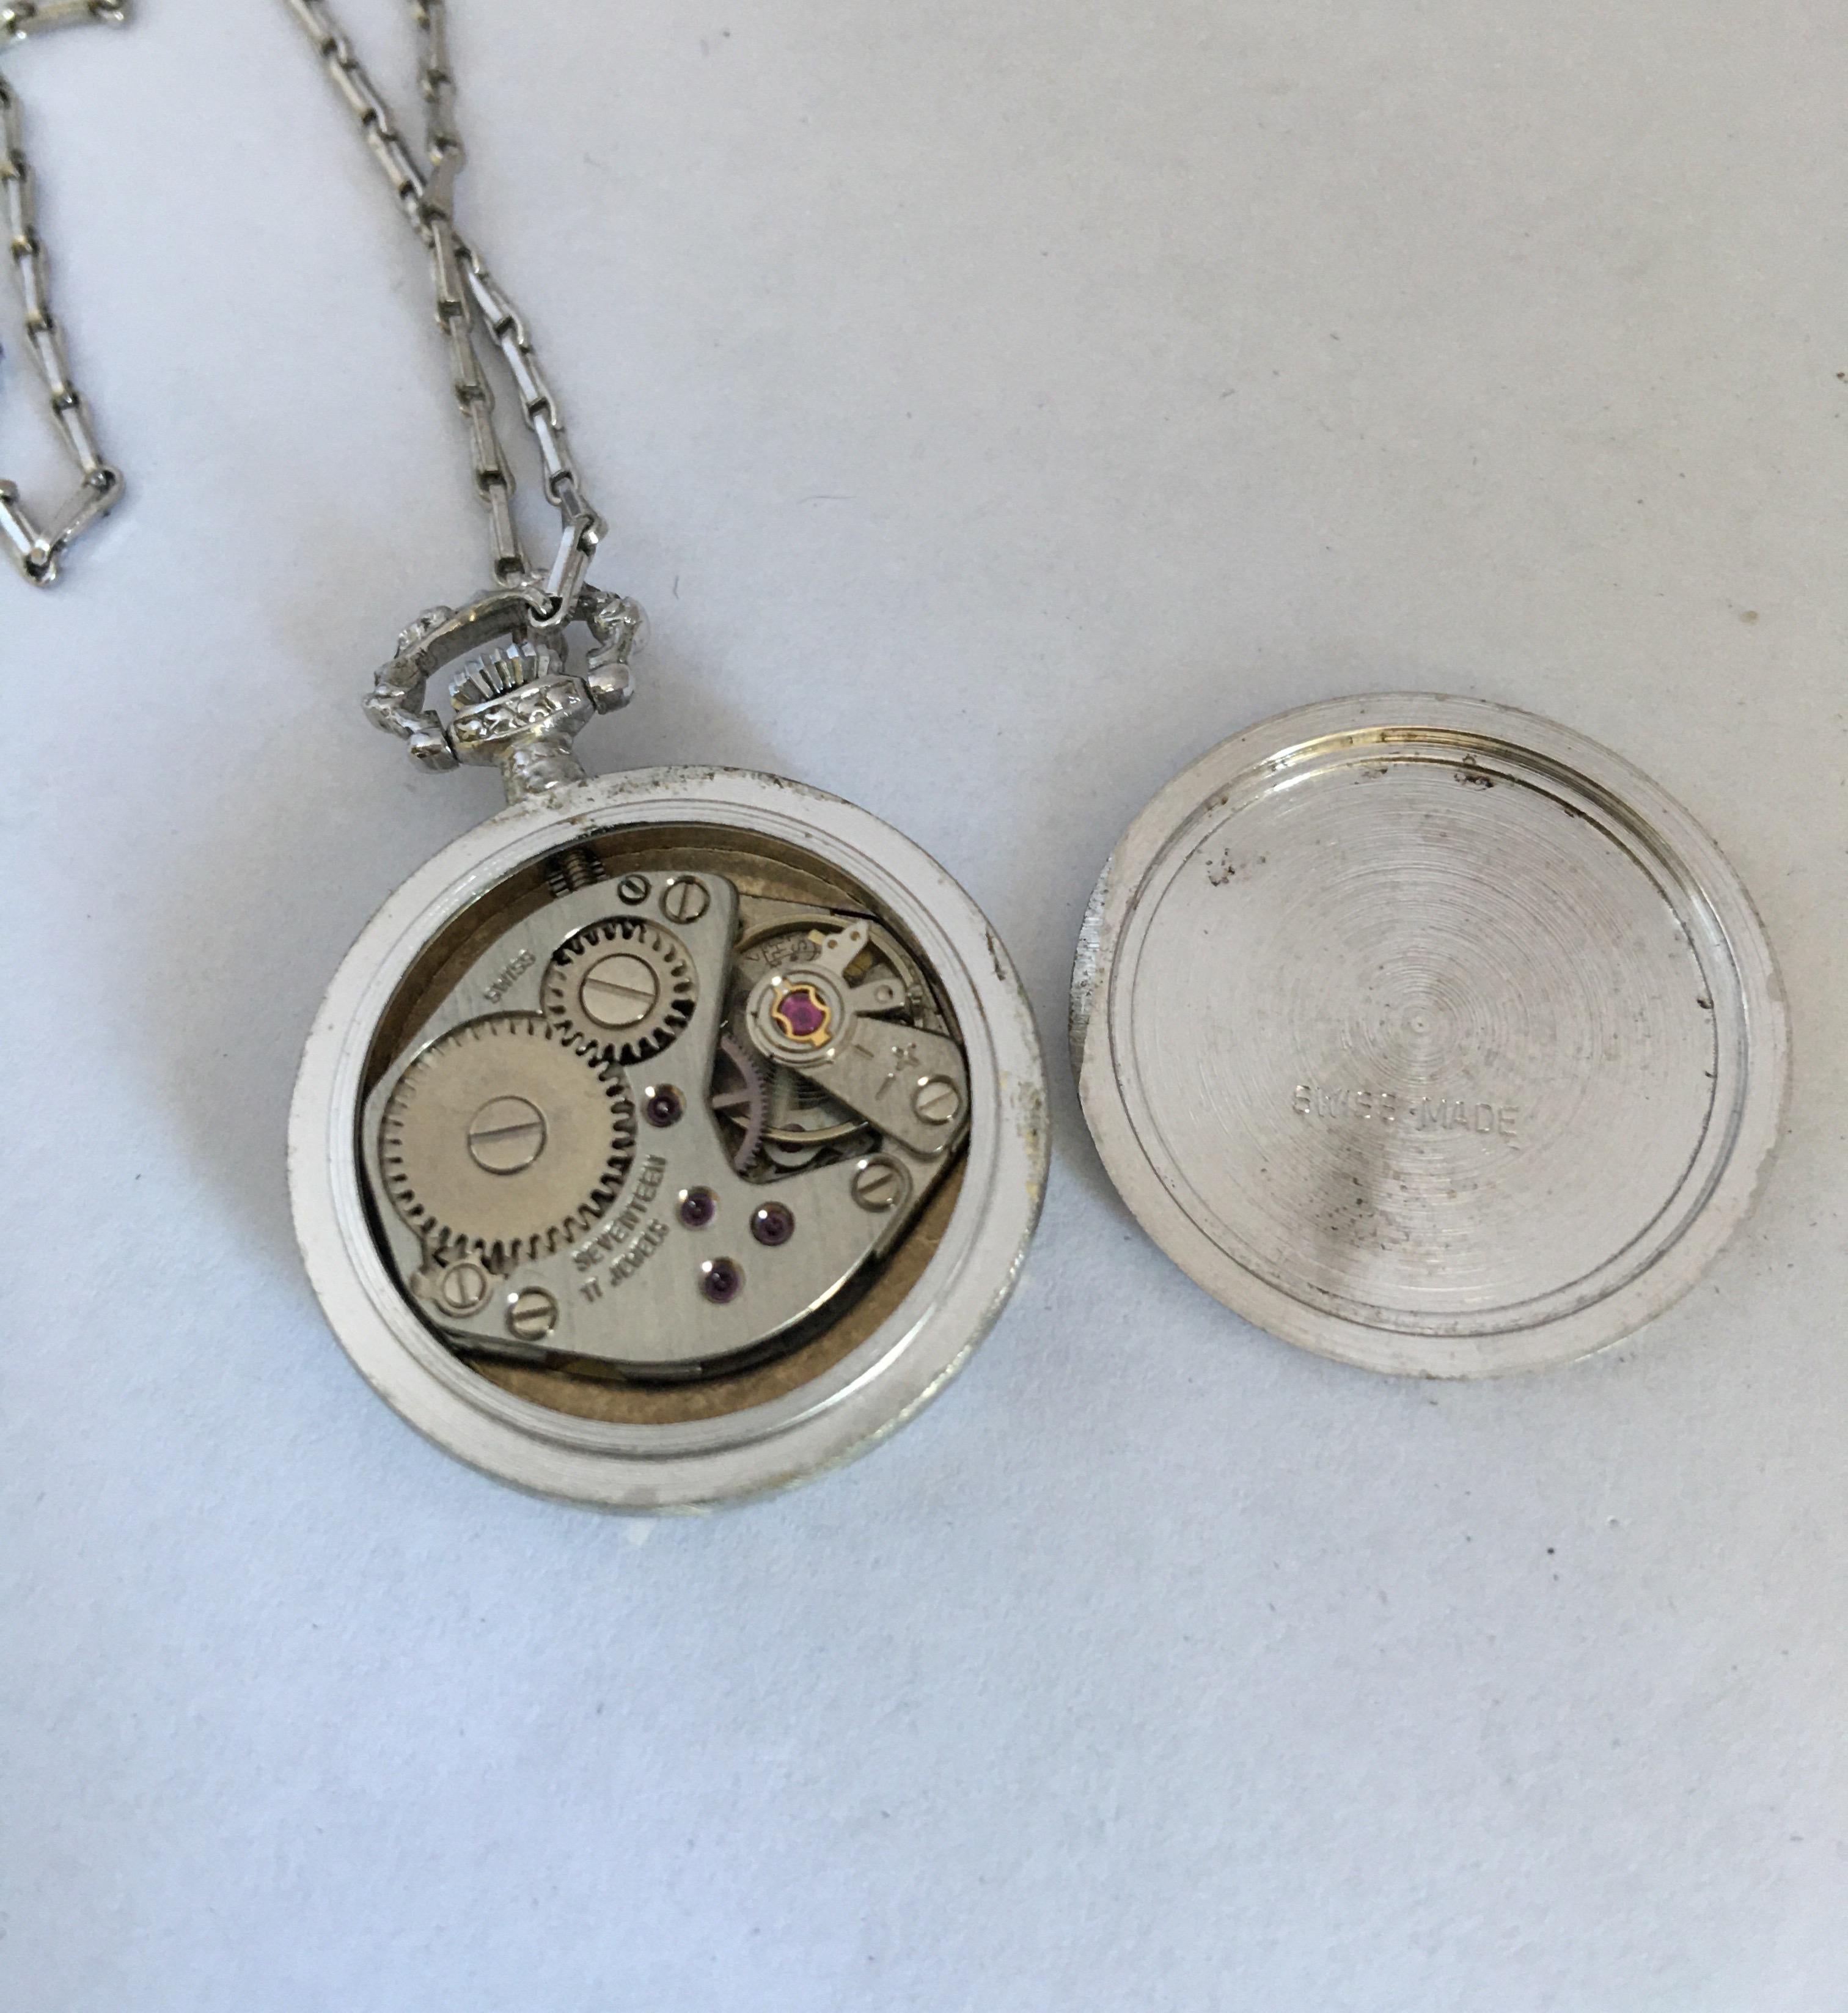 Vintage 1960s Hand-Winding Silver Plated Engraved Pendant Watch 9